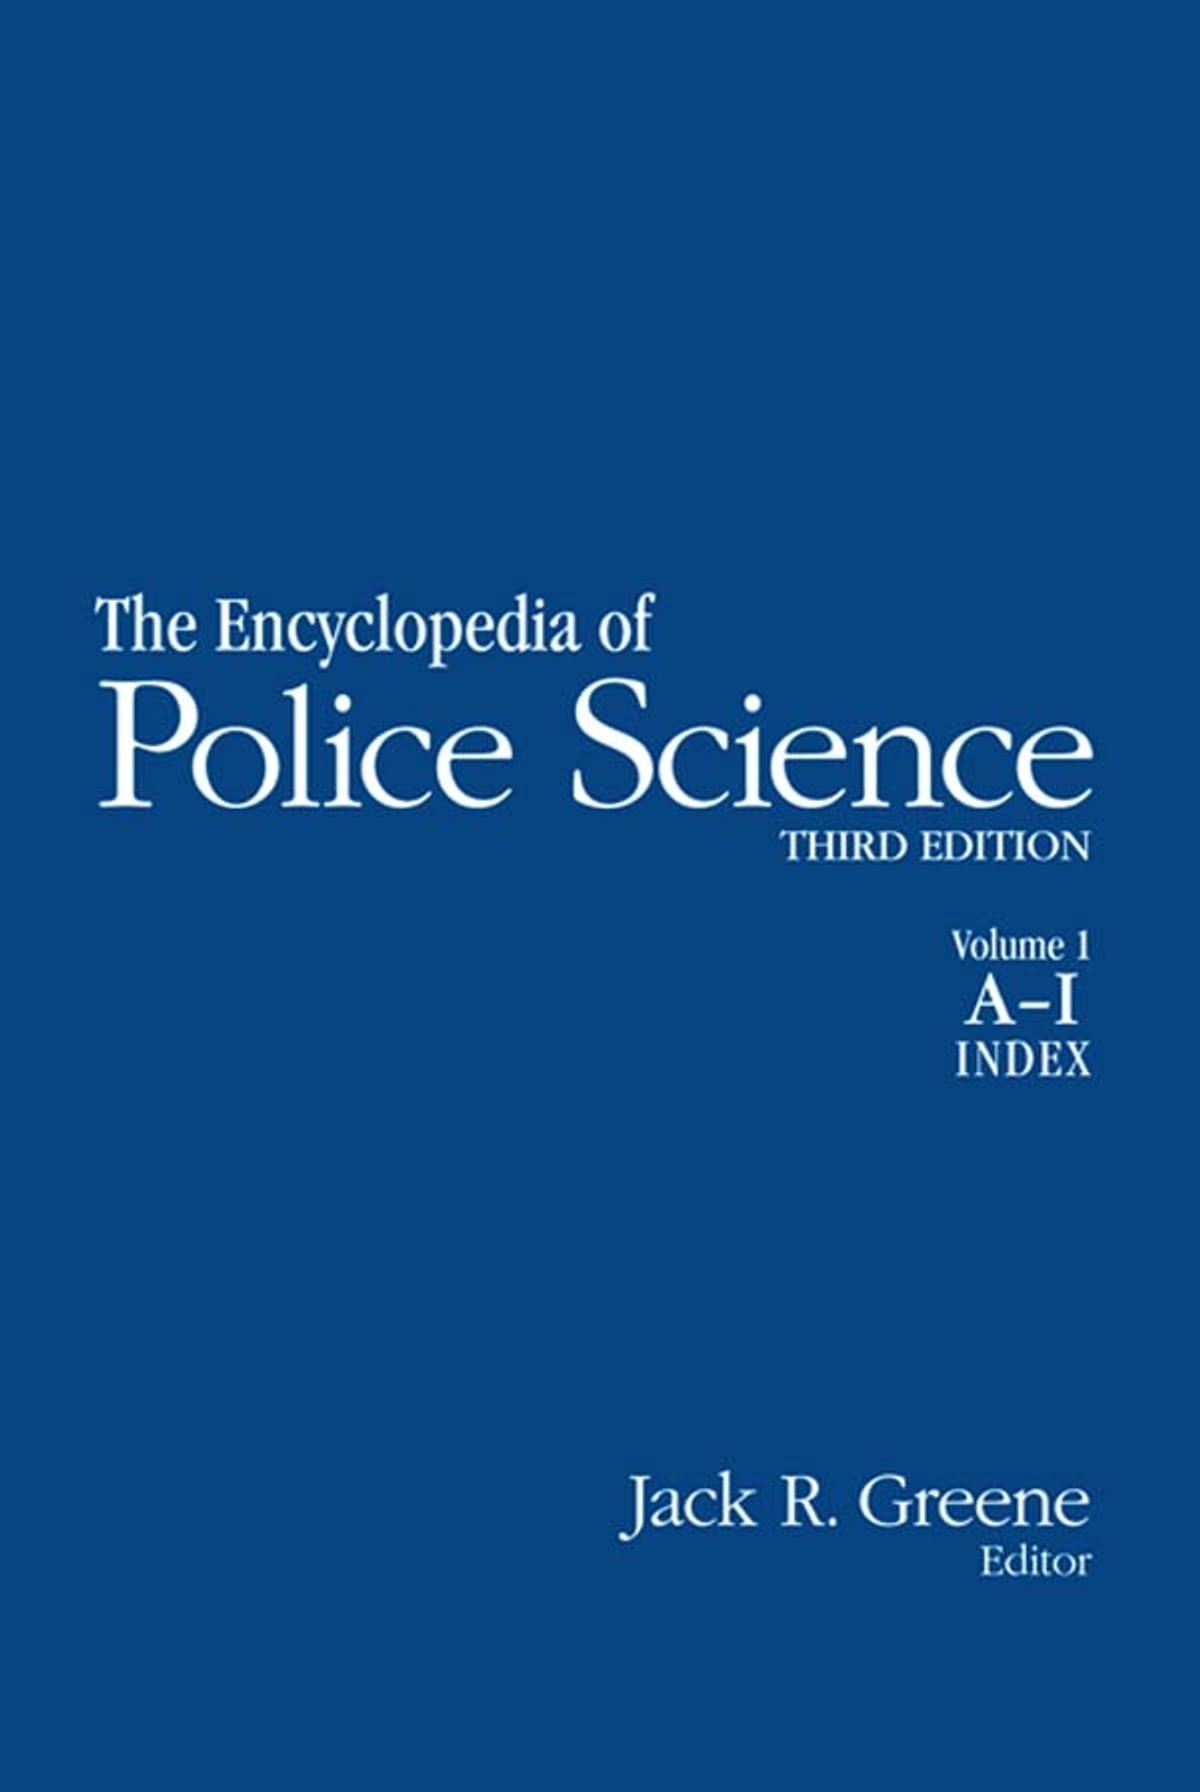 The Encyclopedia of Police Science